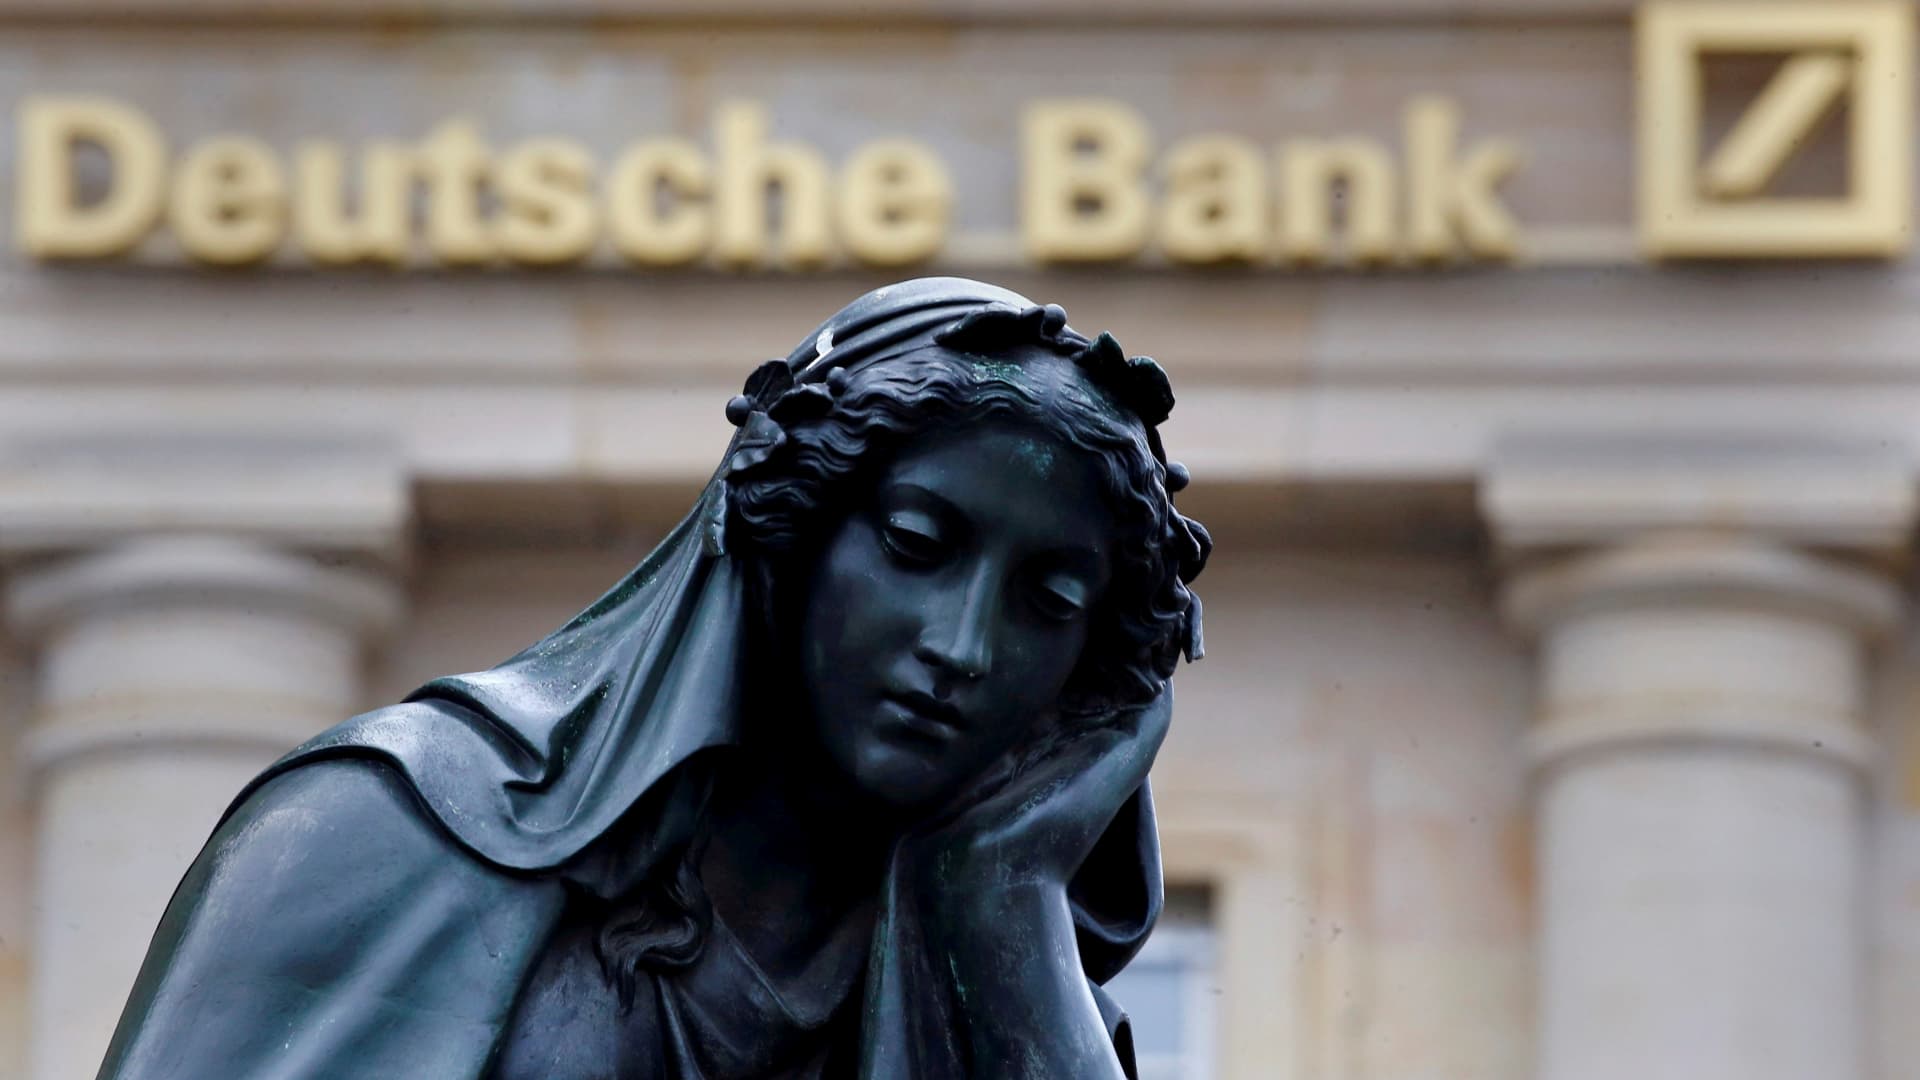 Deutsche Bank shares slide 13% after sudden spike in the cost of insuring against its default - CNBC